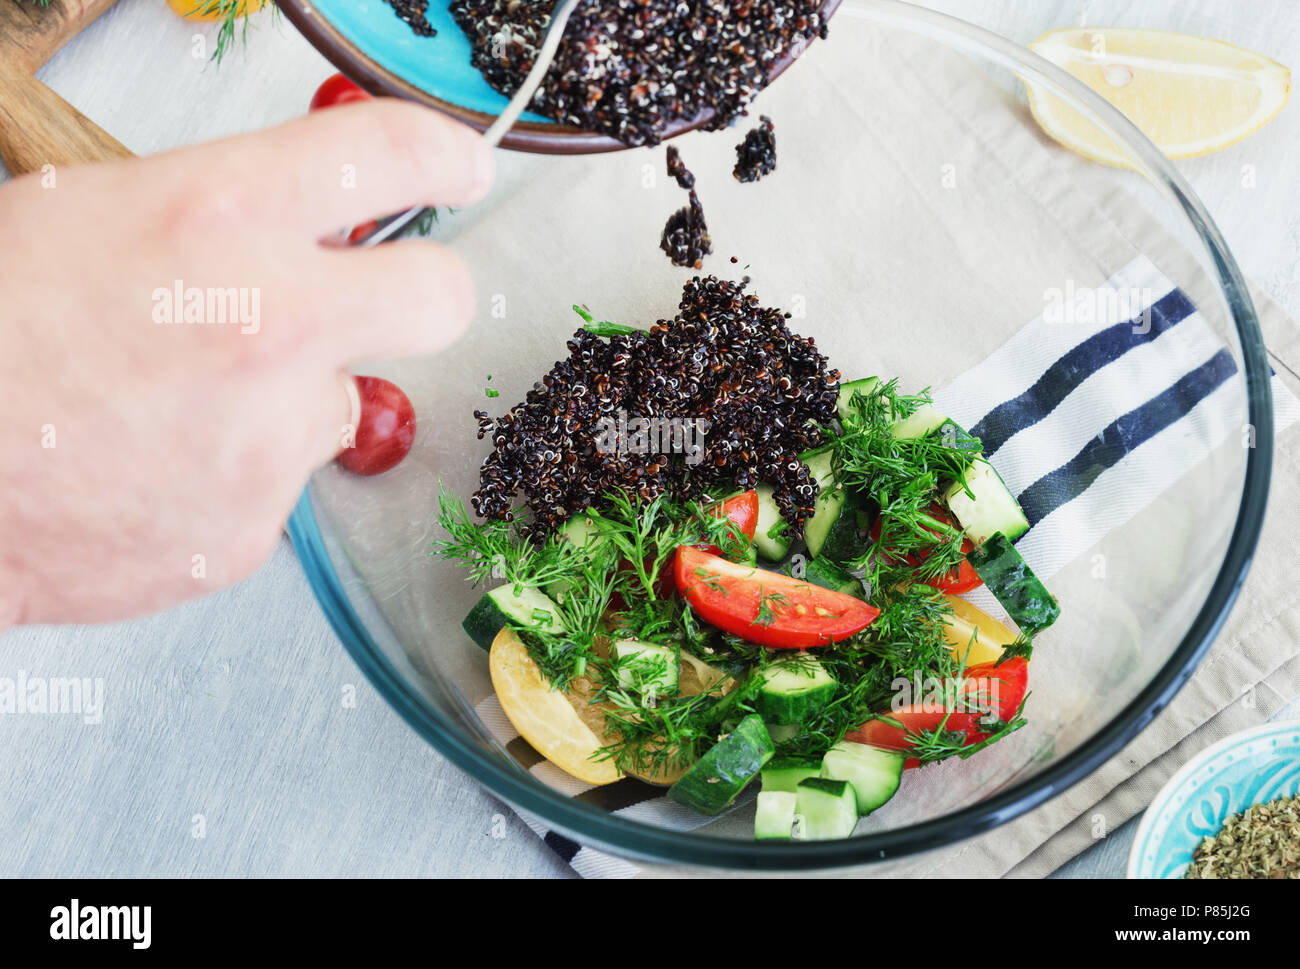 Cooking healthy food. Man preparing salad of black quinoa and vegetables Stock Photo